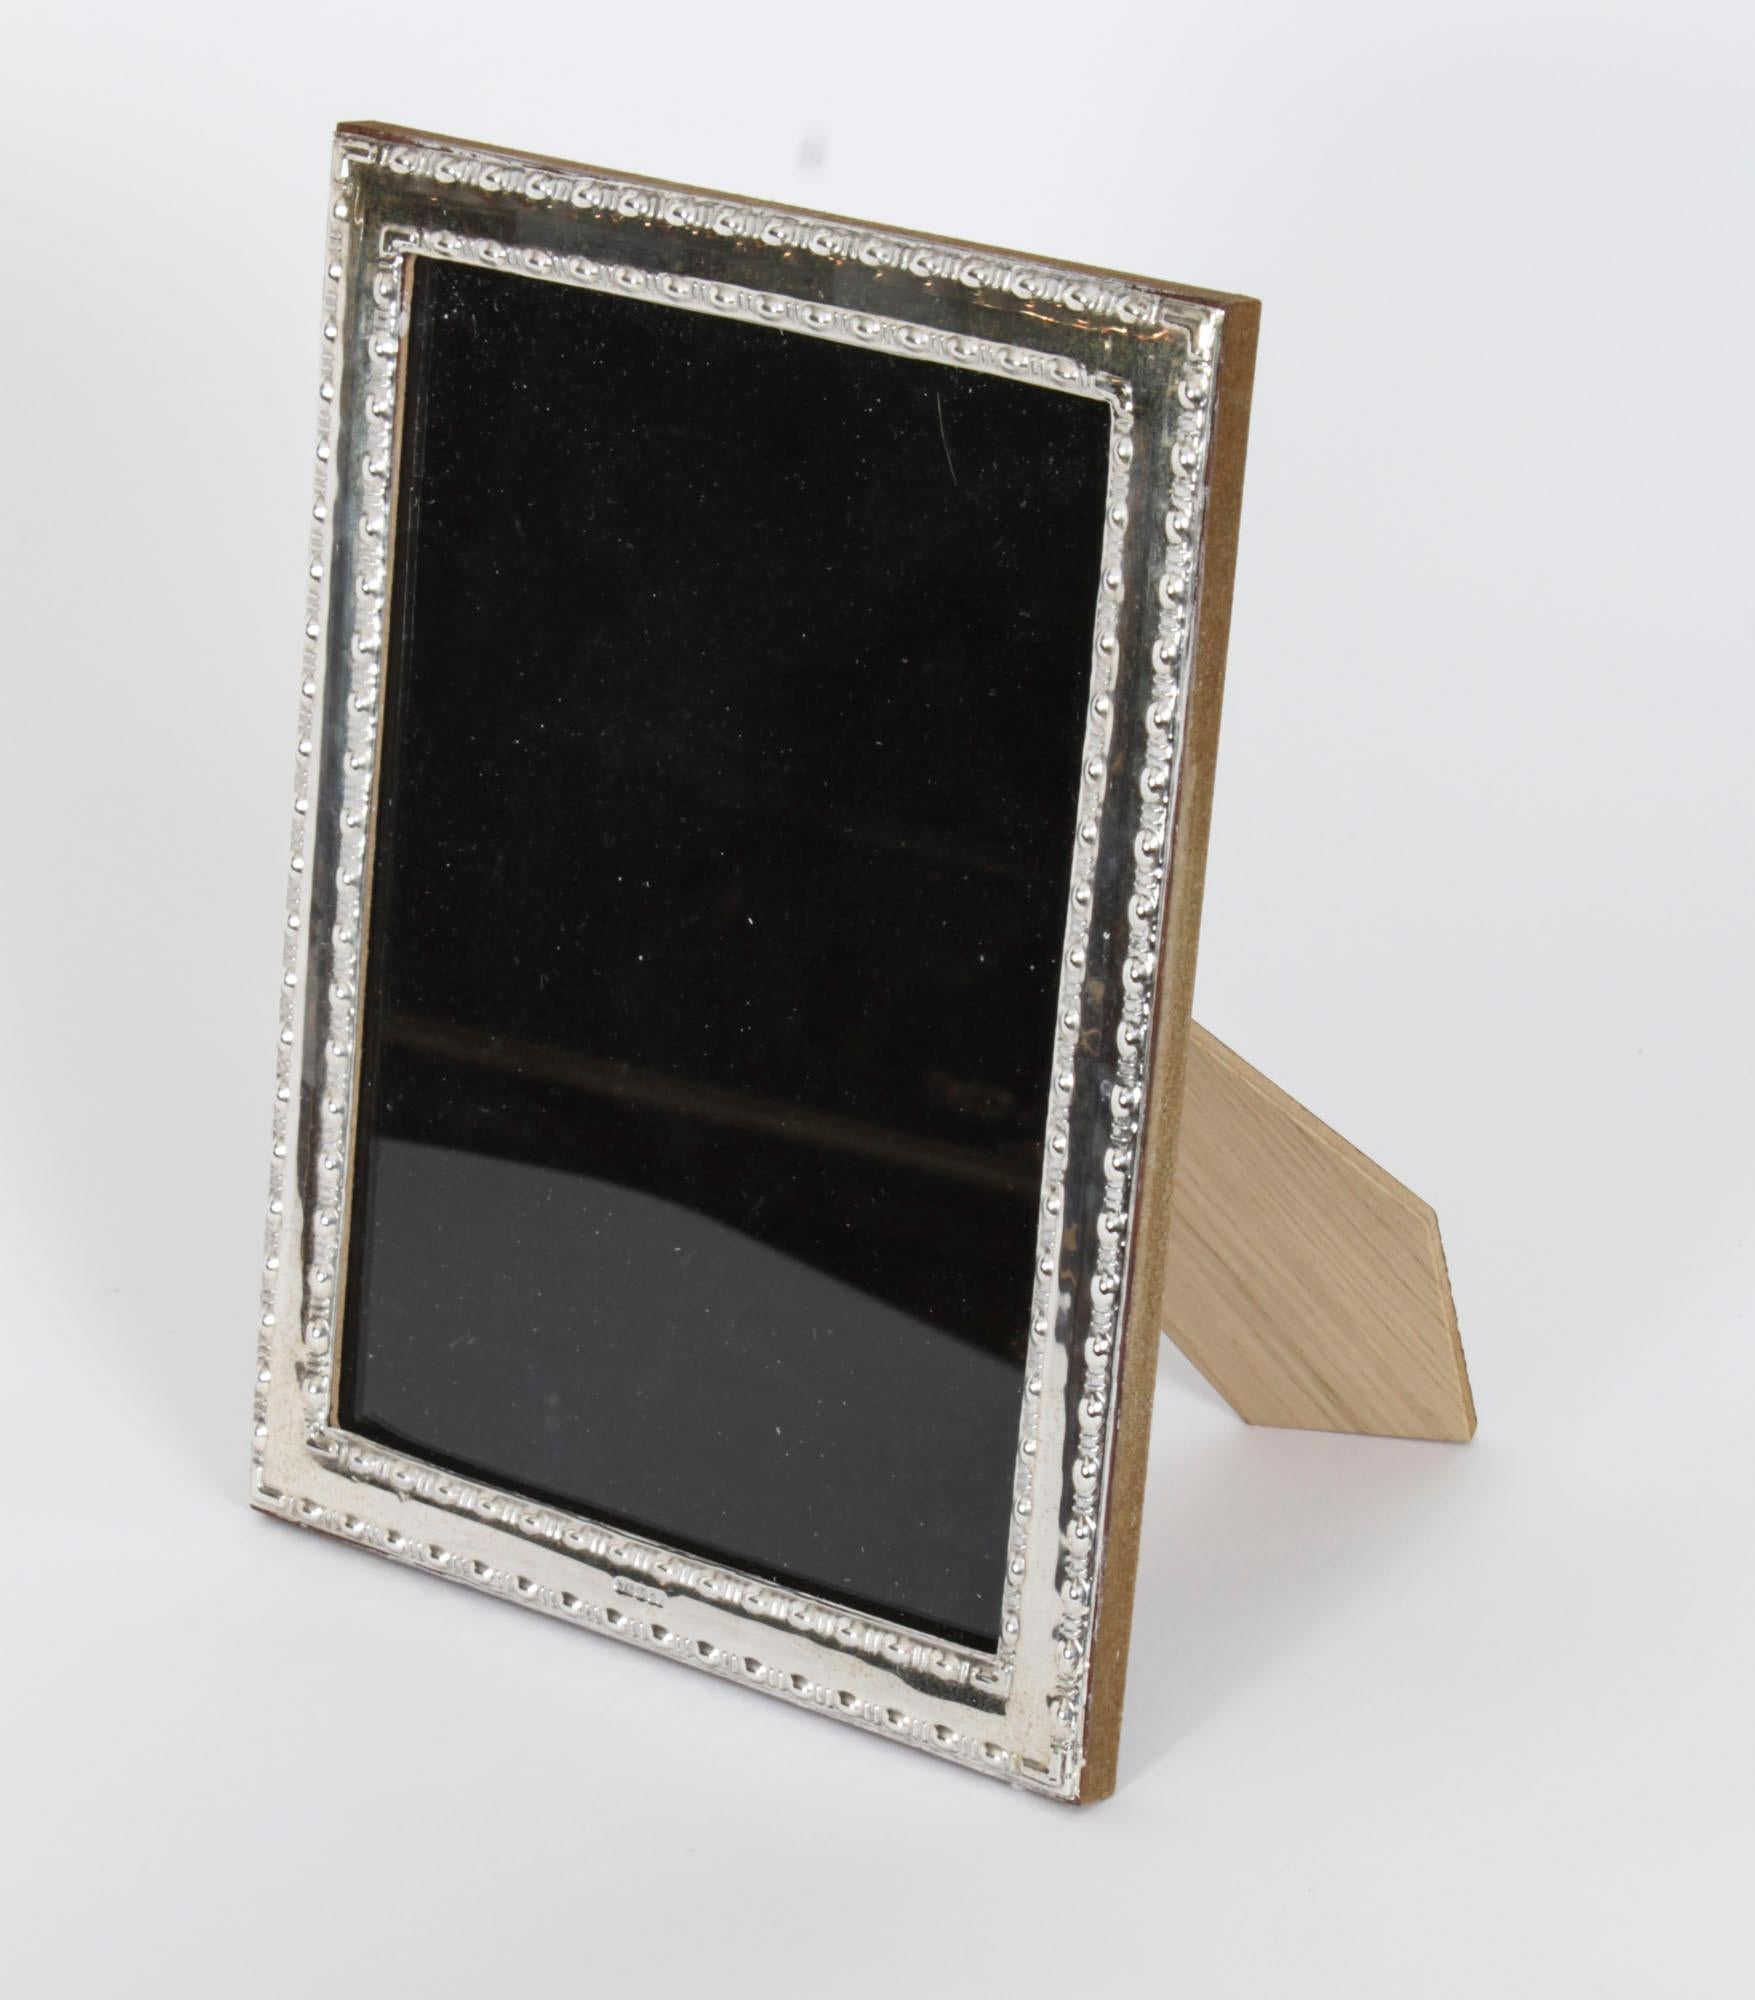 A truly superb pair of Vintage sterling silver photo frames, by Highfield Frames, London. 

The beautiful rectangular shaped photo frames are superbly decorated with double egg and dart banding.

An excellent gift idea for many occasions and an